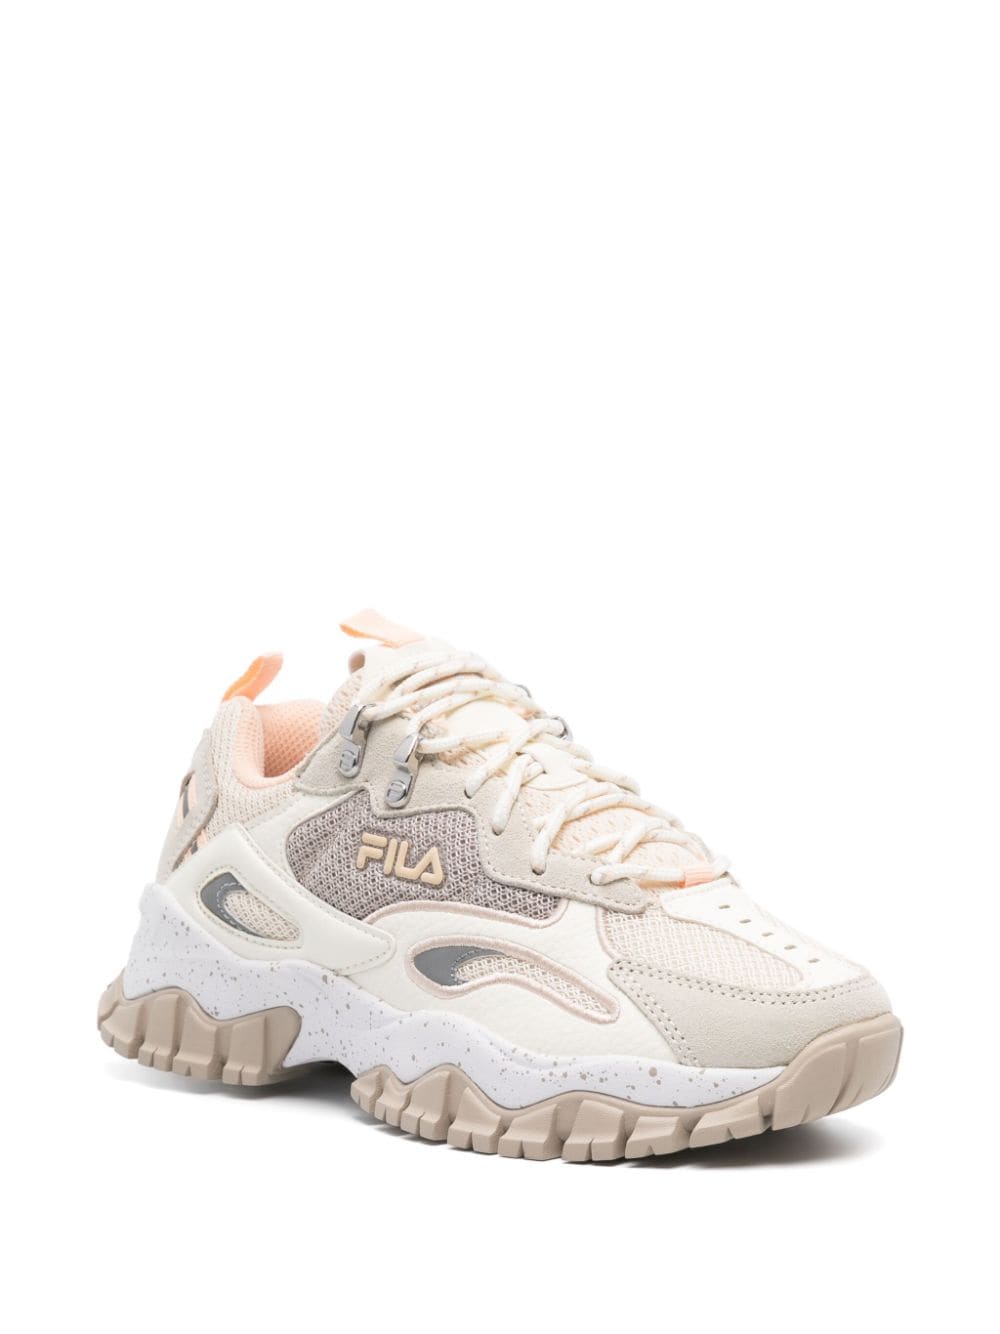 Fila Ray Tracer mesh sneakers - Beige